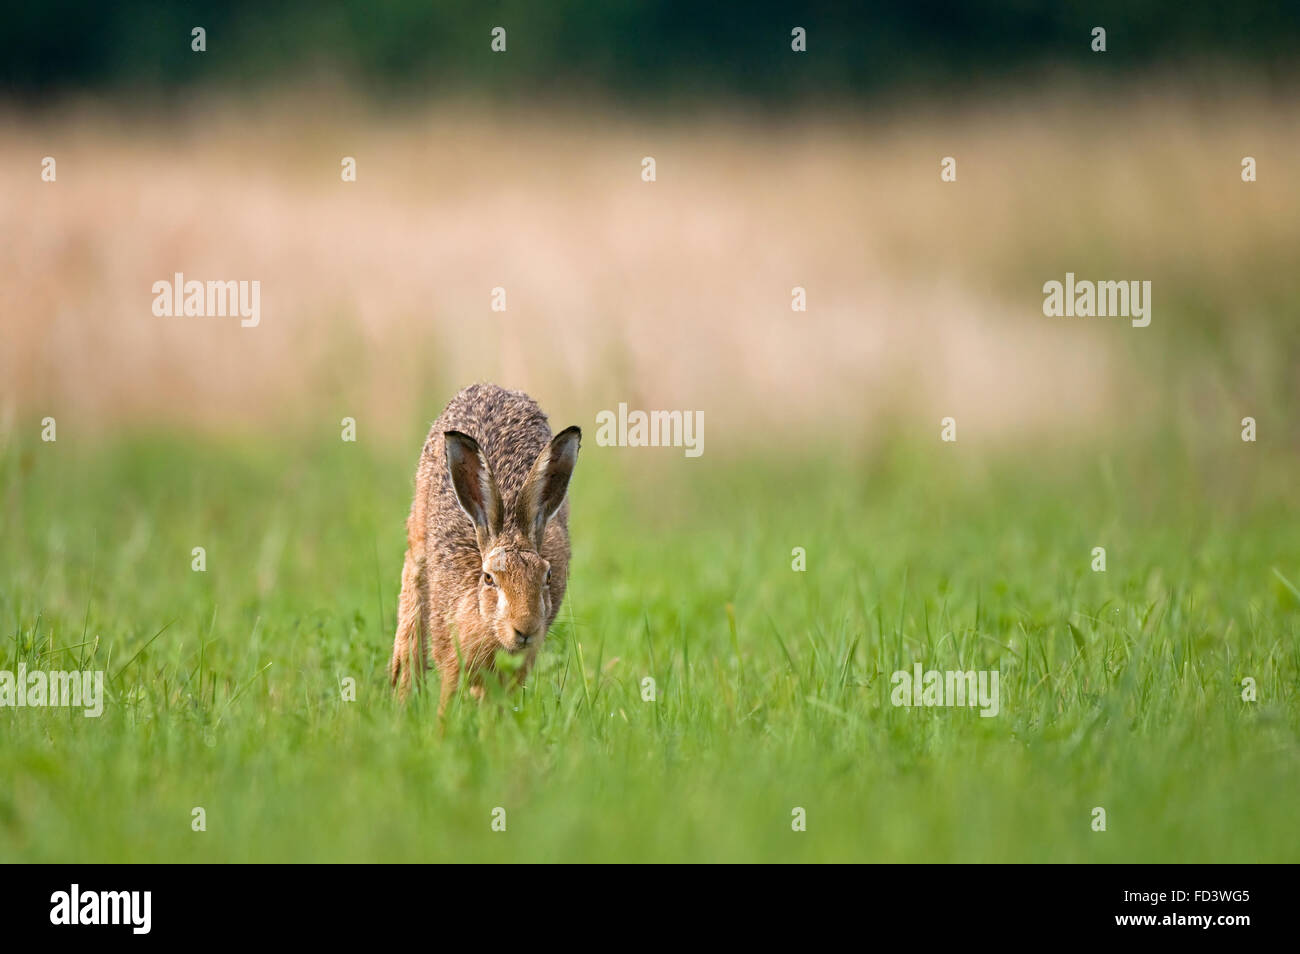 Wild brown hare running in a field Stock Photo